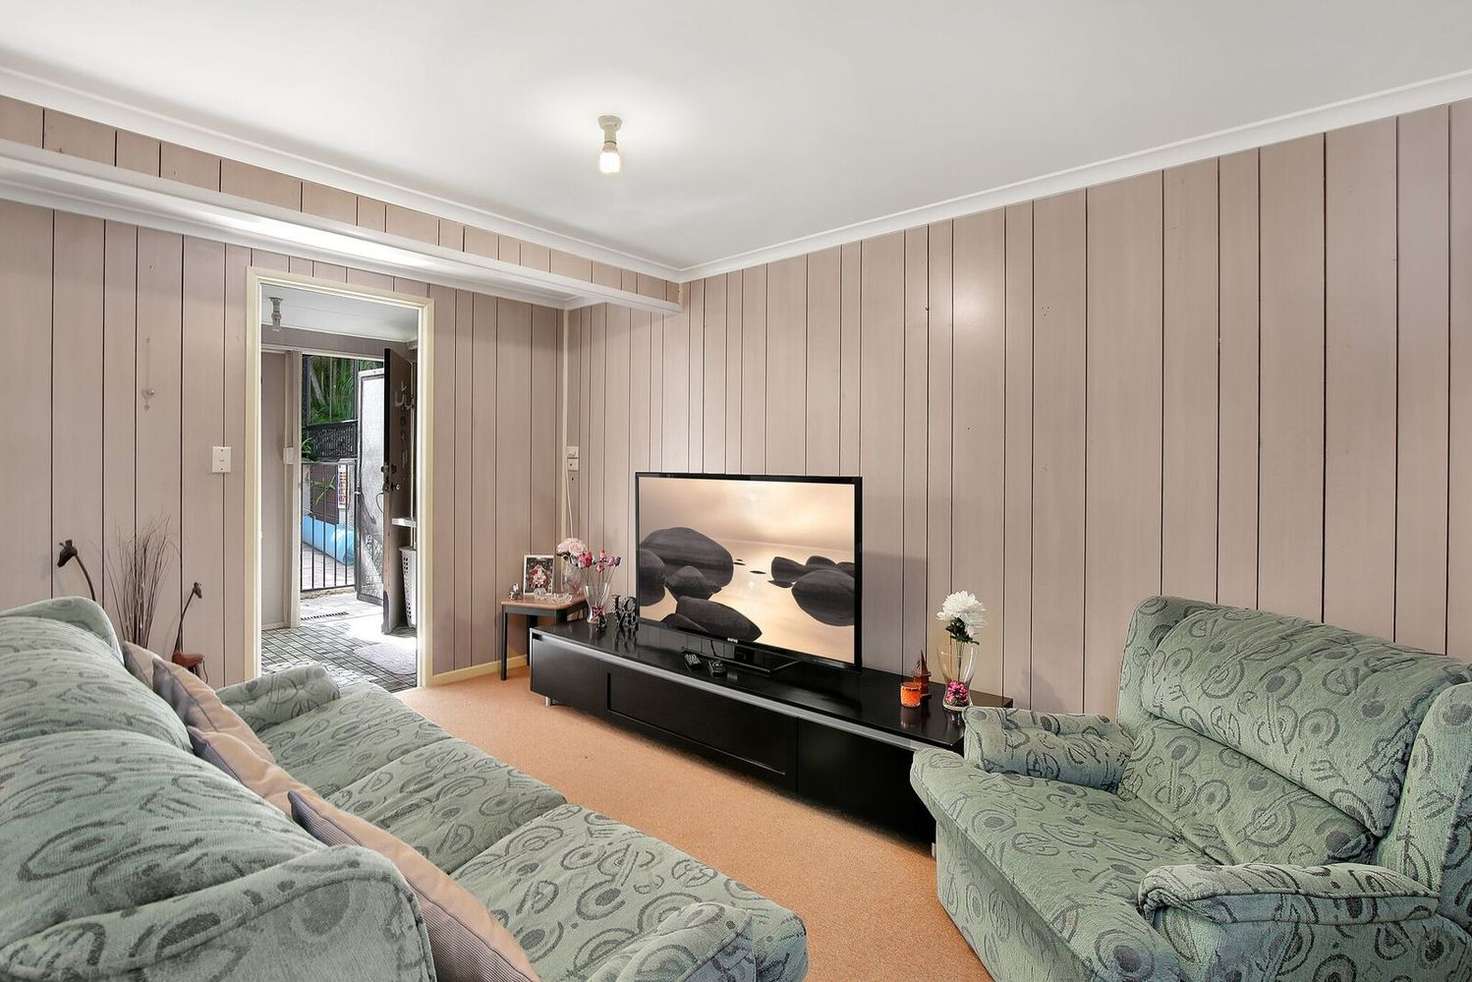 Main view of Homely flat listing, 2 Warrawee Avenue, Ashmore QLD 4214